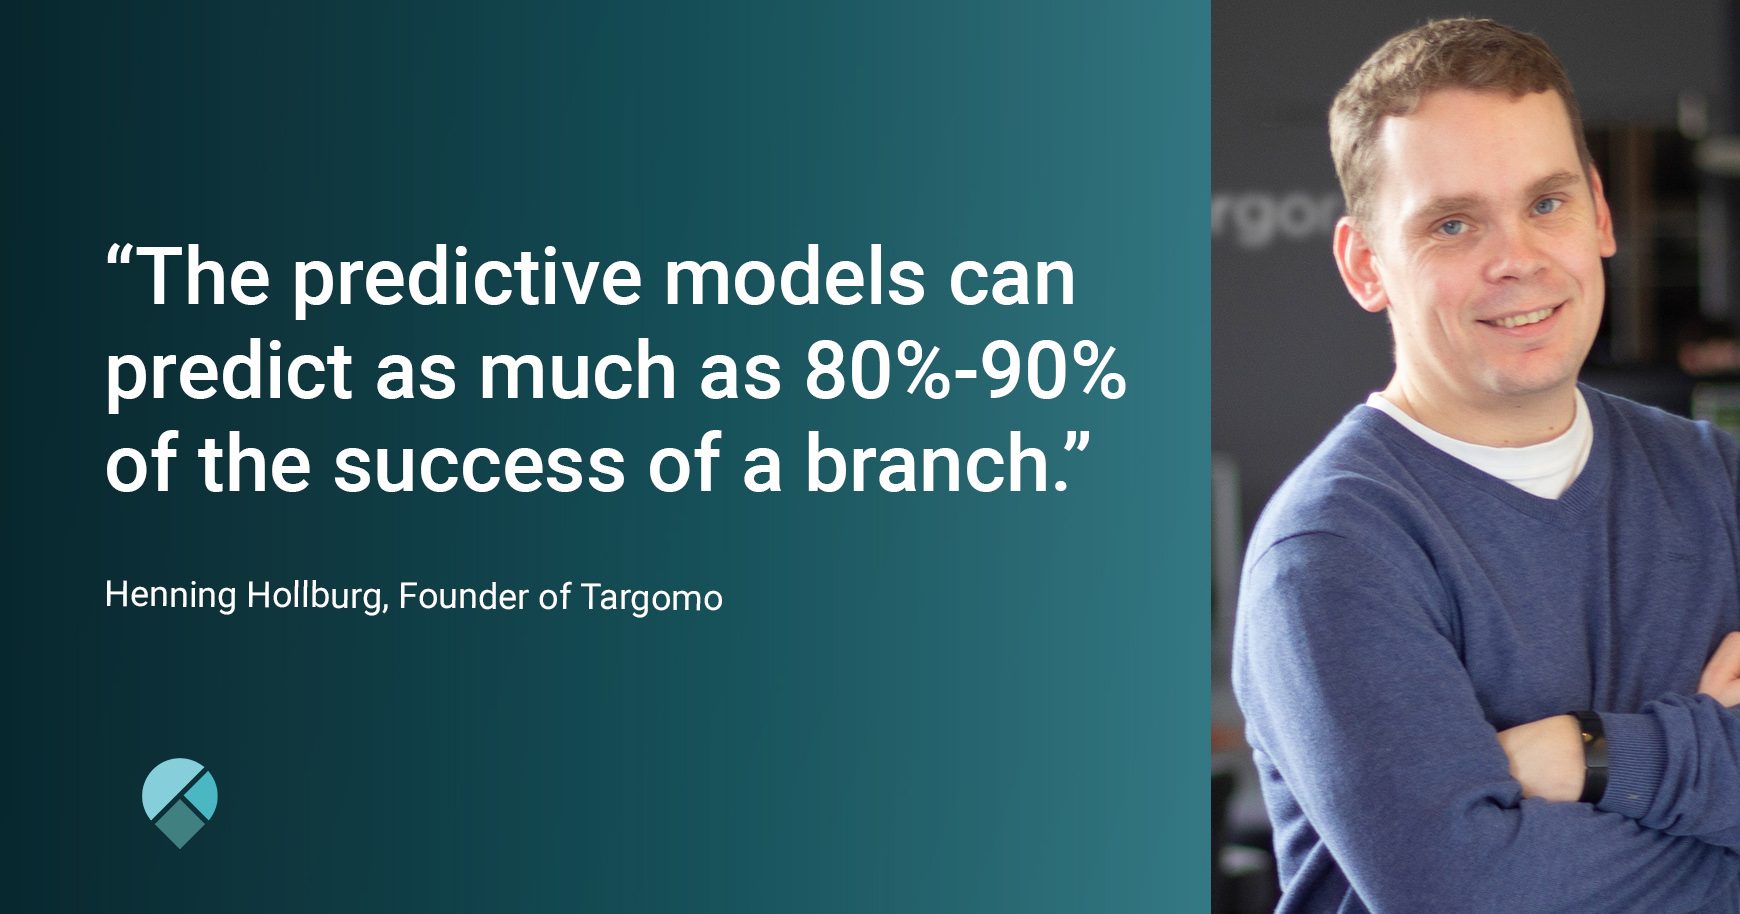 “The predictive models can predict as much as 80%-90% of the success of a branch.”